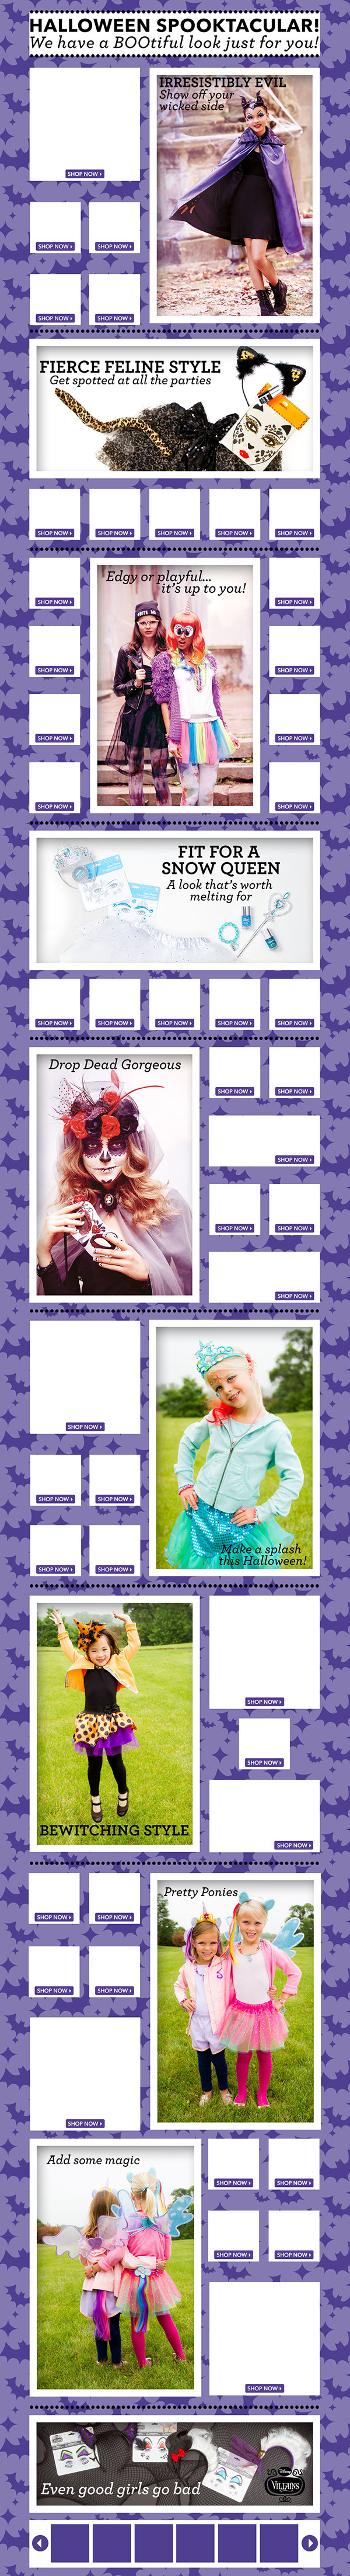 claire's Halloween landing page